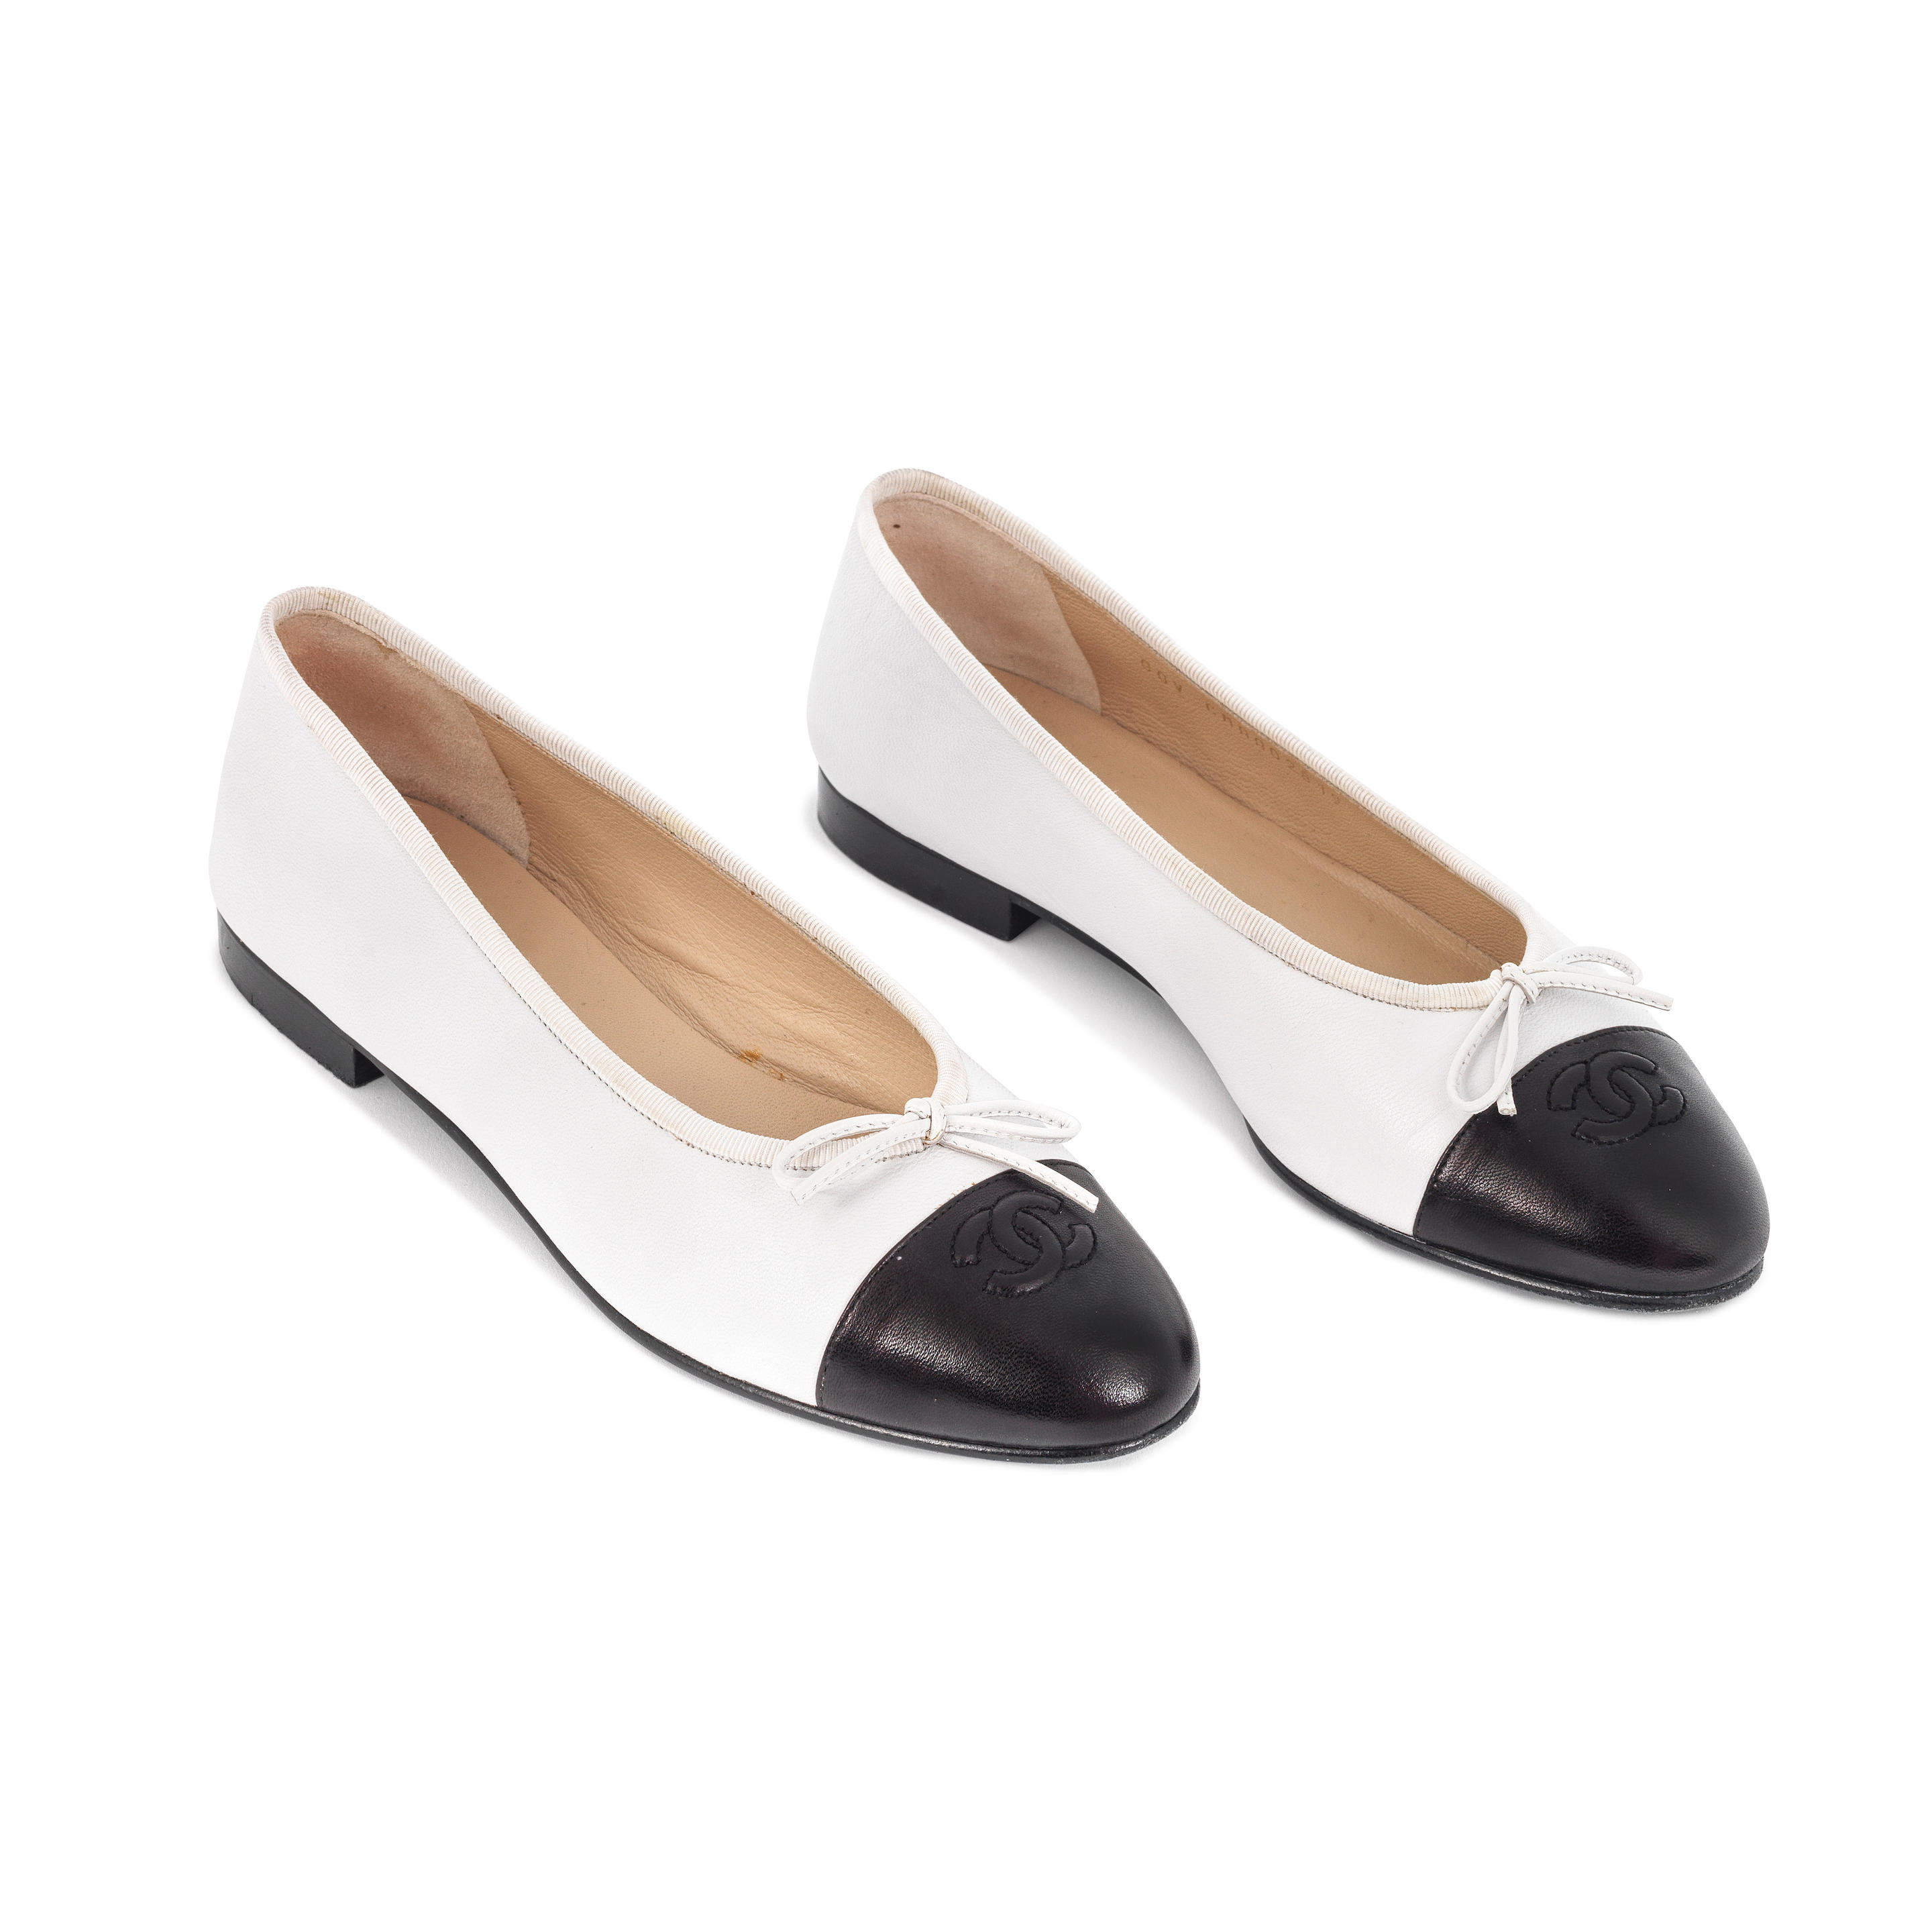 Bonhams : Chanel a Pair of Black and White Leather Ballet Flats